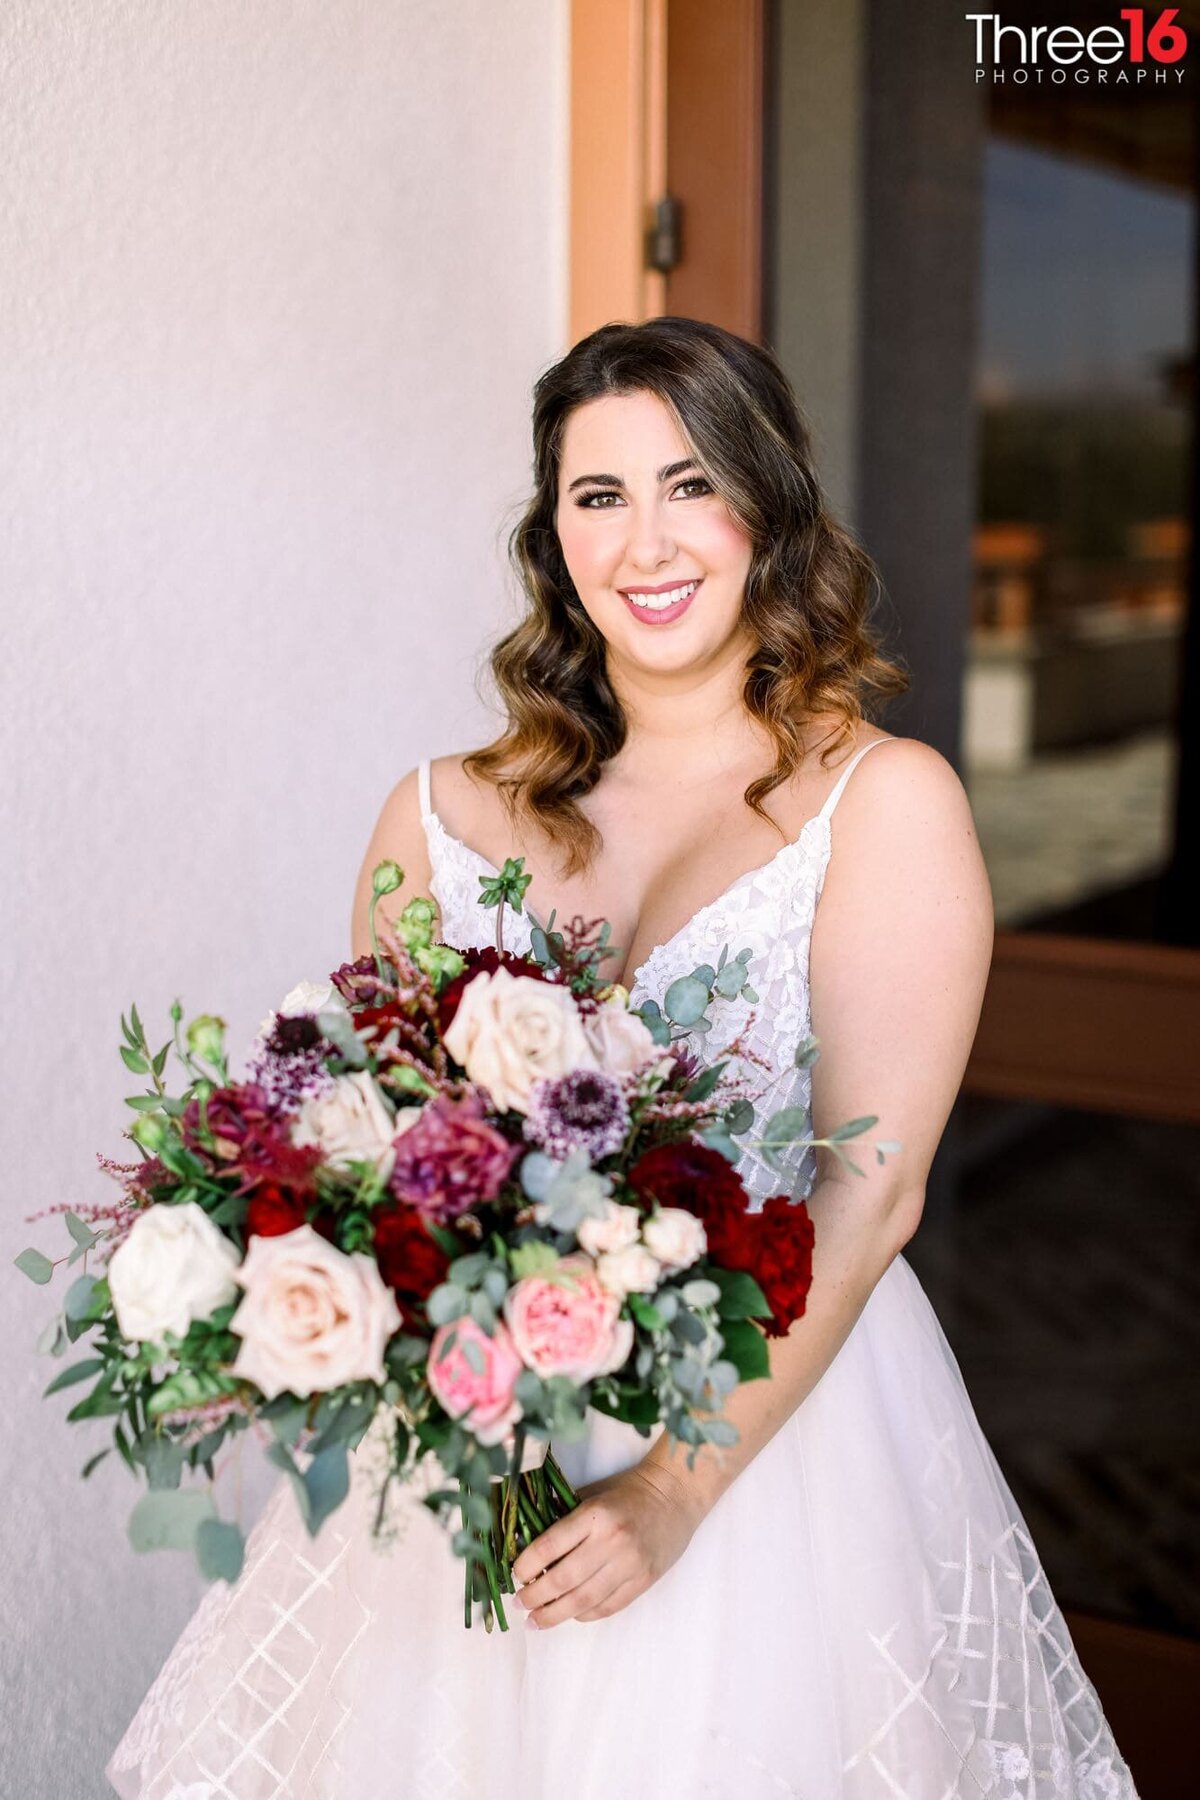 Bride poses is her wedding gown holding her beautiful large bouquet of flowers